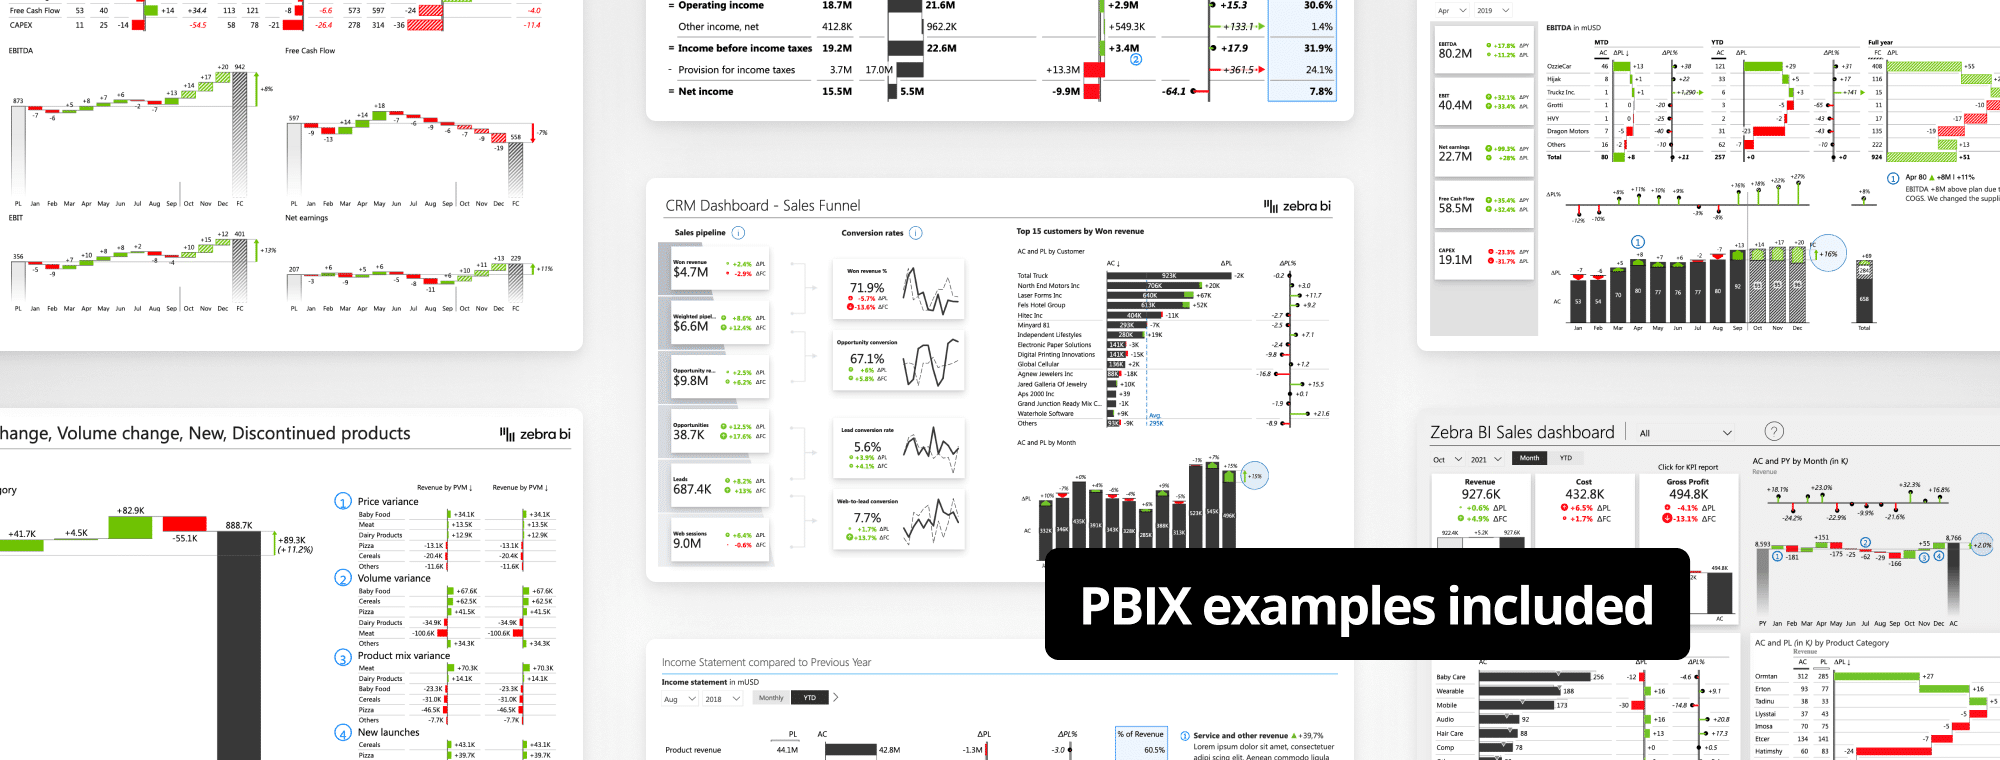 KPI Dashboard For Tracking Business Performance One Pager Sample